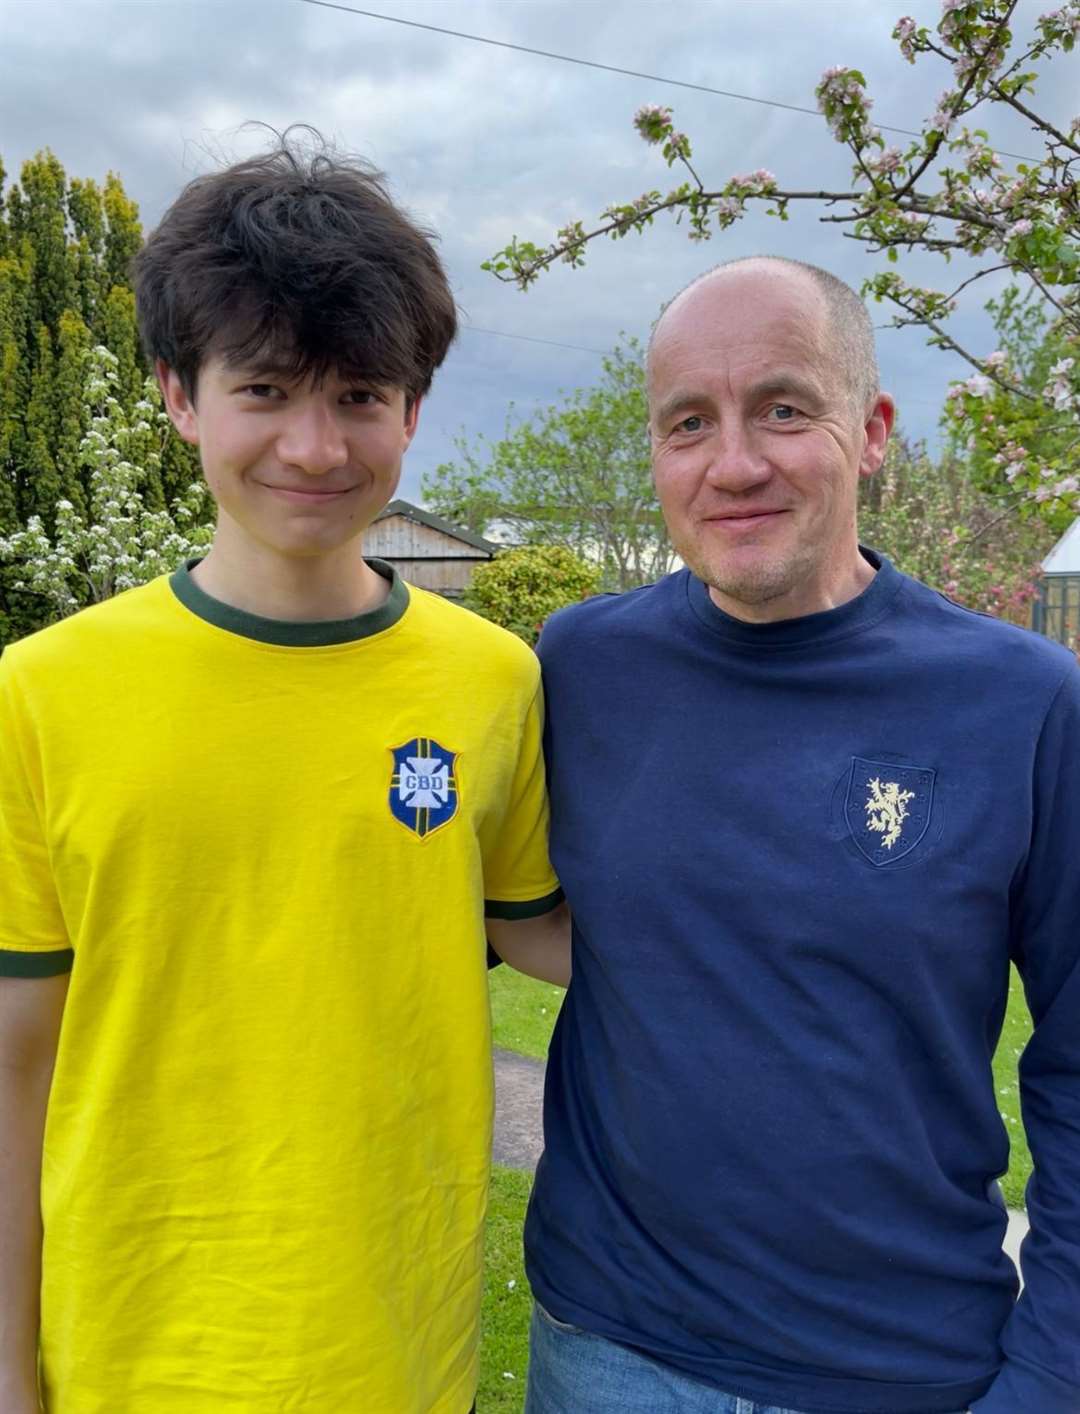 Hector sports the new Scotland shirt designed to mark the 150th anniversary. Michael wears another TOFFS classic, the Brazil top. Picture: Grace Mackenzie